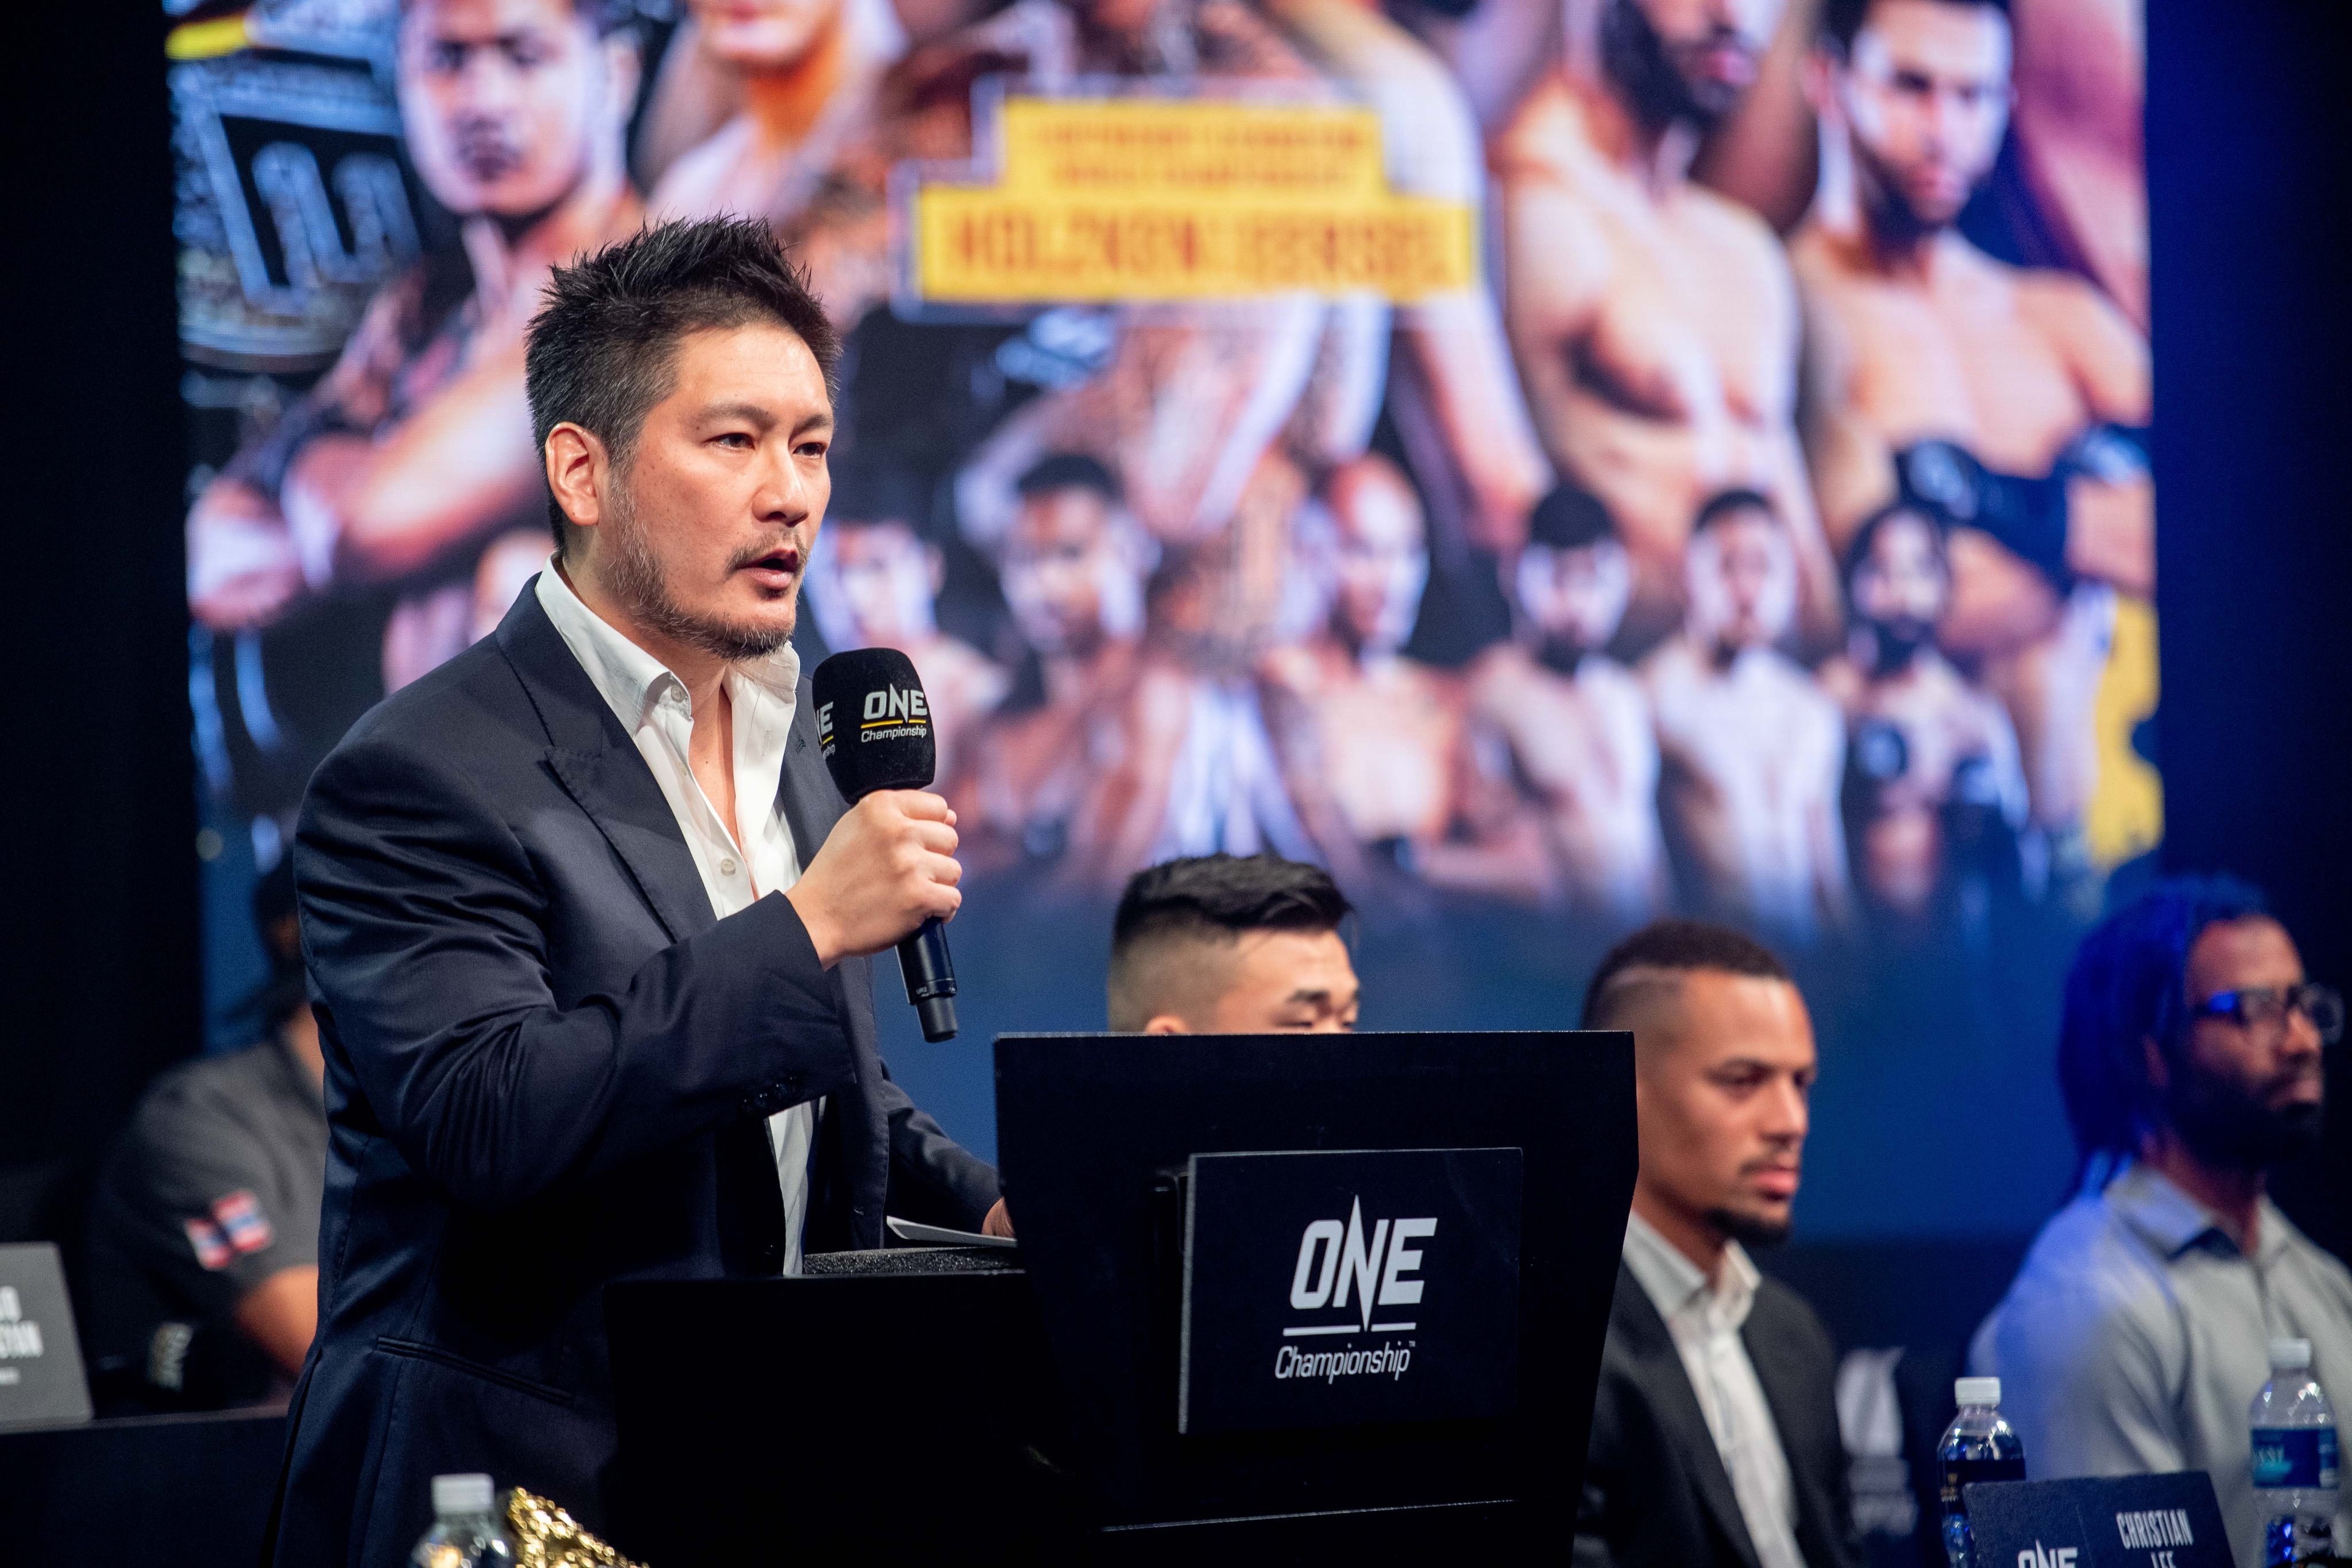 ONE Championship CEO Chatri Sityodtong speaks at a press conference. Photo: ONE Championship